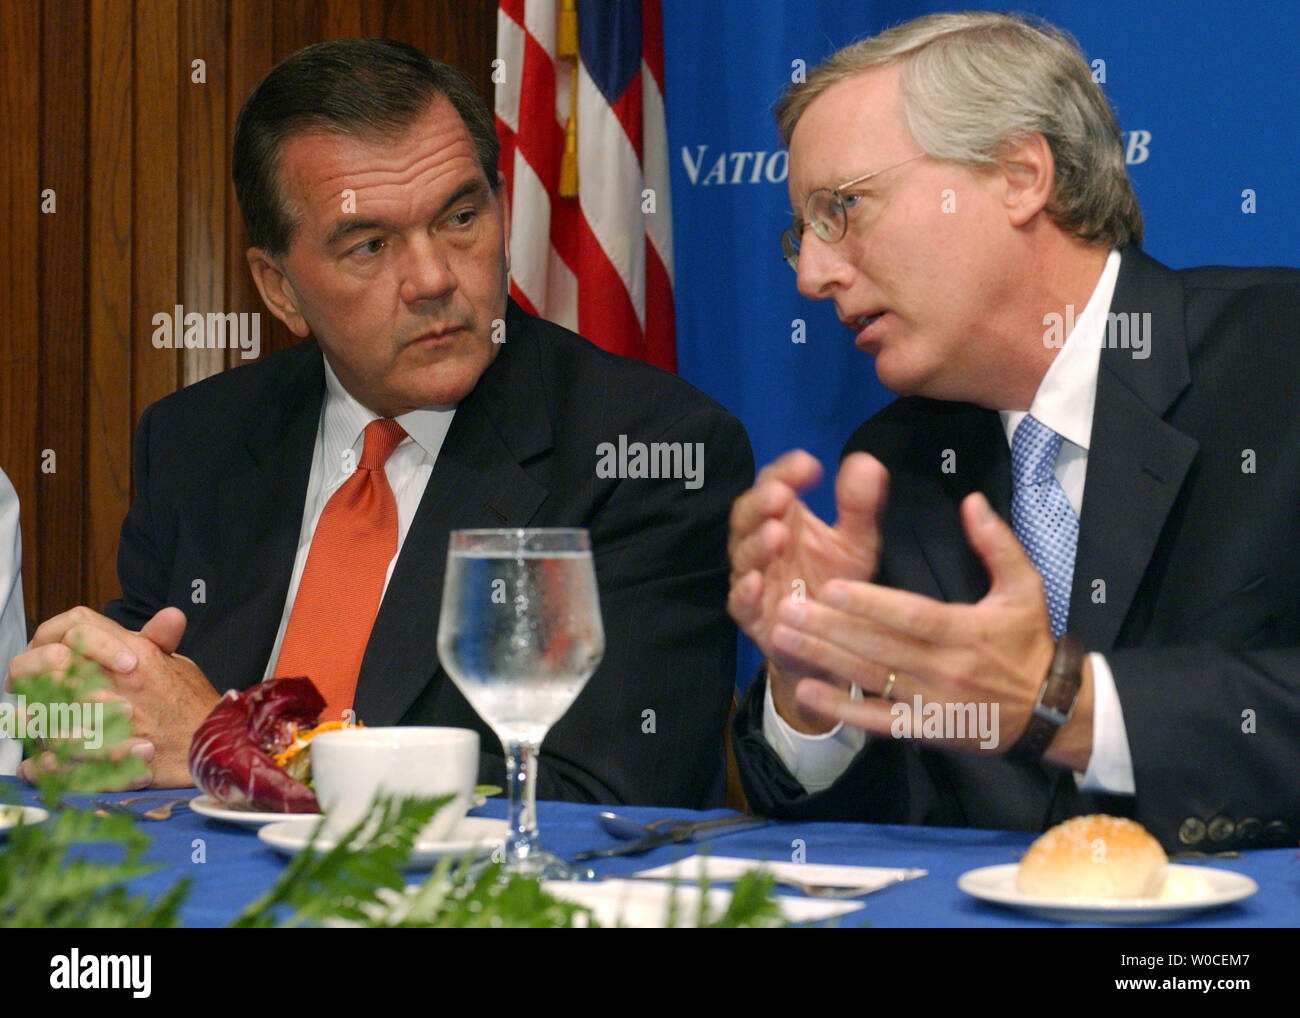 Secretary of Homeland Security Tom Ridge, left, speaks with U.S. Newswire's Bill McCarren during a luncheon at the National Press Club in Washington where Ridge spoke on Sept. 7, 2004. Ridge admitted there is still more work to be done, but insisted the U.S. was making progress in making the country safer, more secure, and more capable of responding to a terrorist attack or natural disaster.   (UPI Photo/Roger L. Wollenberg) Stock Photo